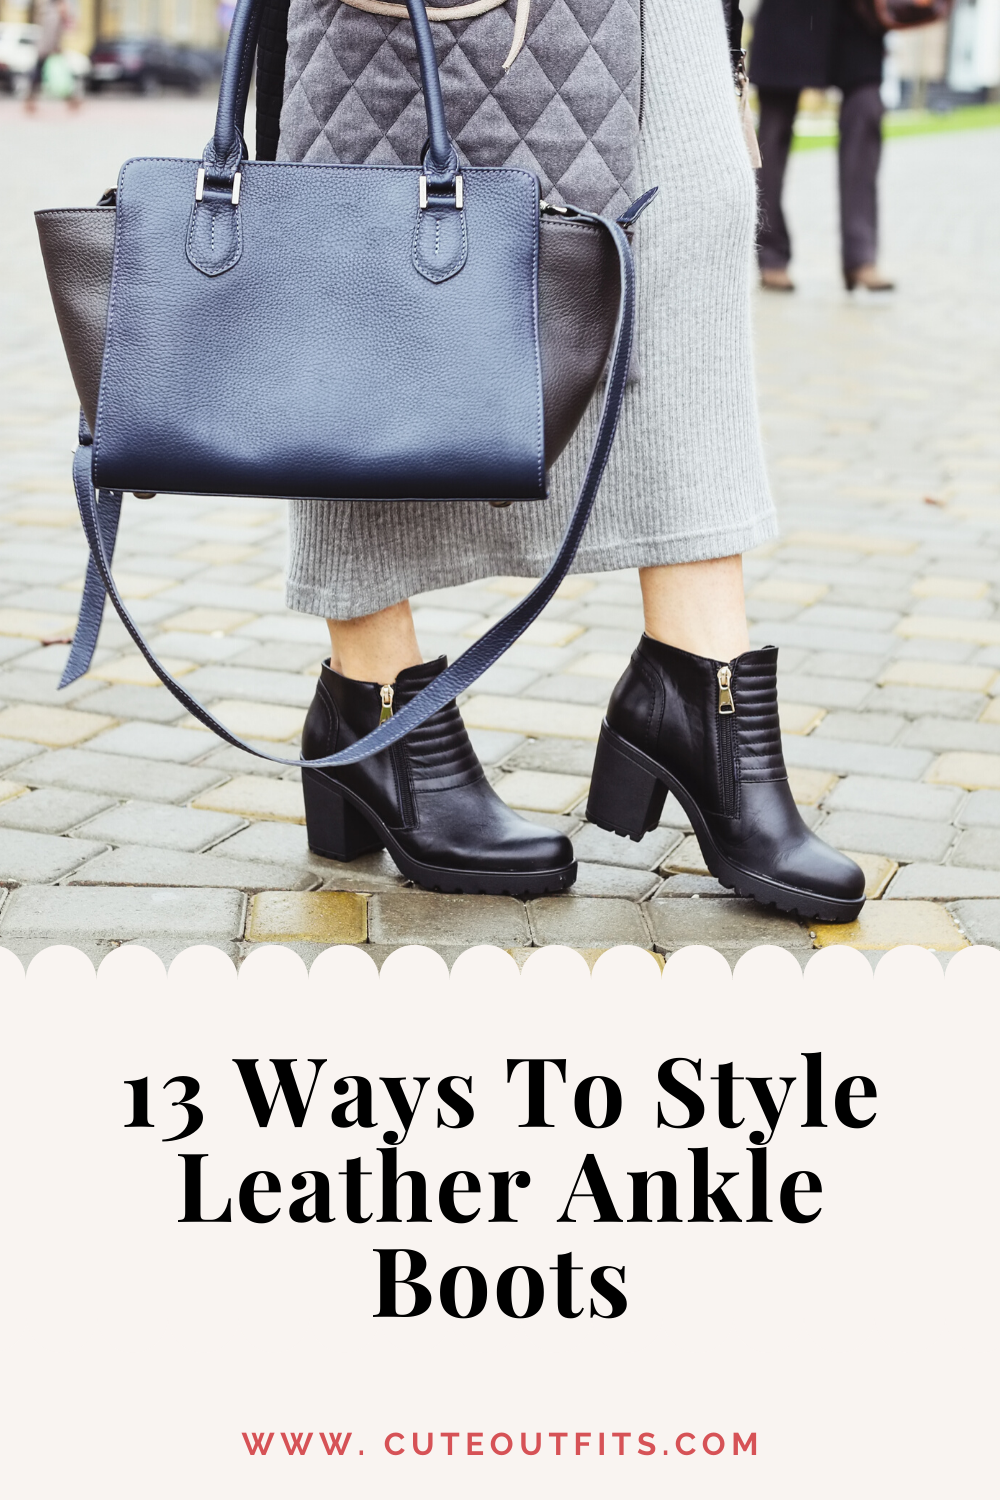 placard | 13 Ways To Style Leather Ankle Boots